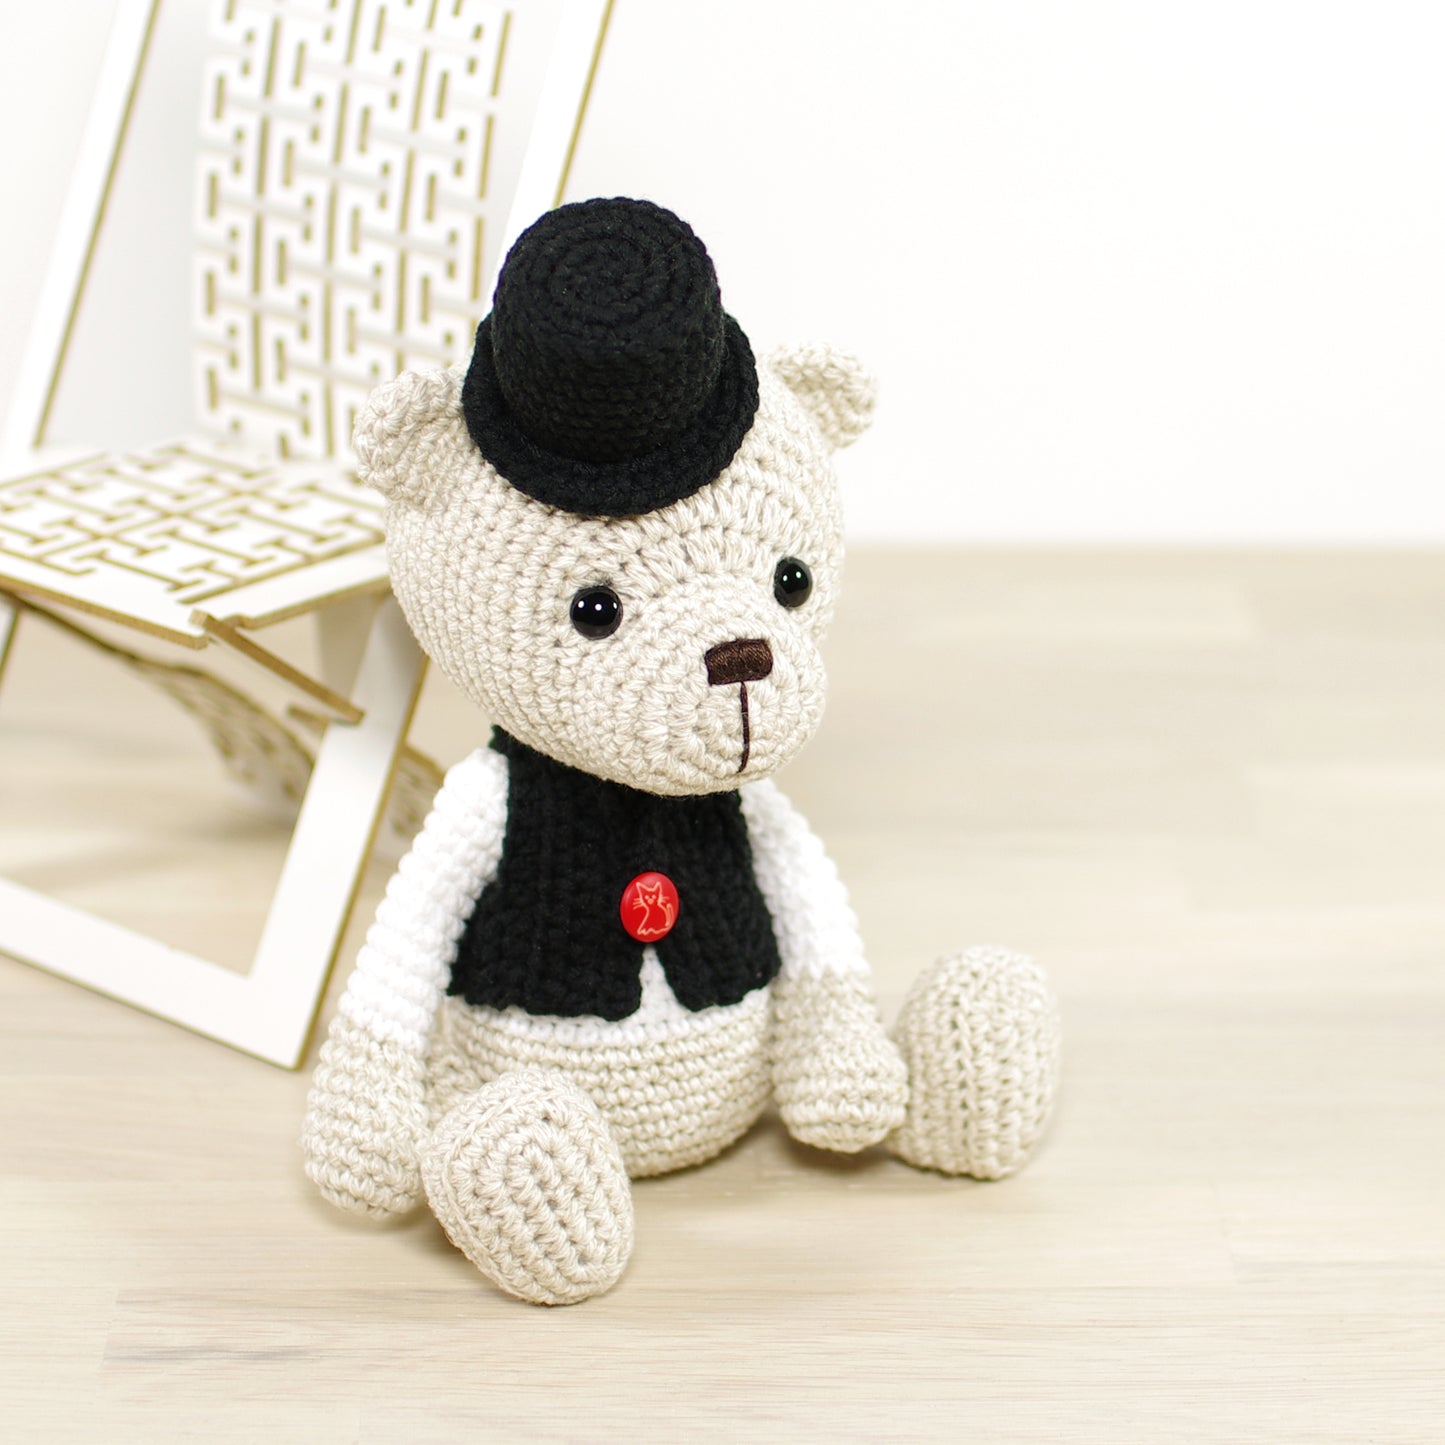 PATTERN: Teddy Bear in a Top Hat and Vest